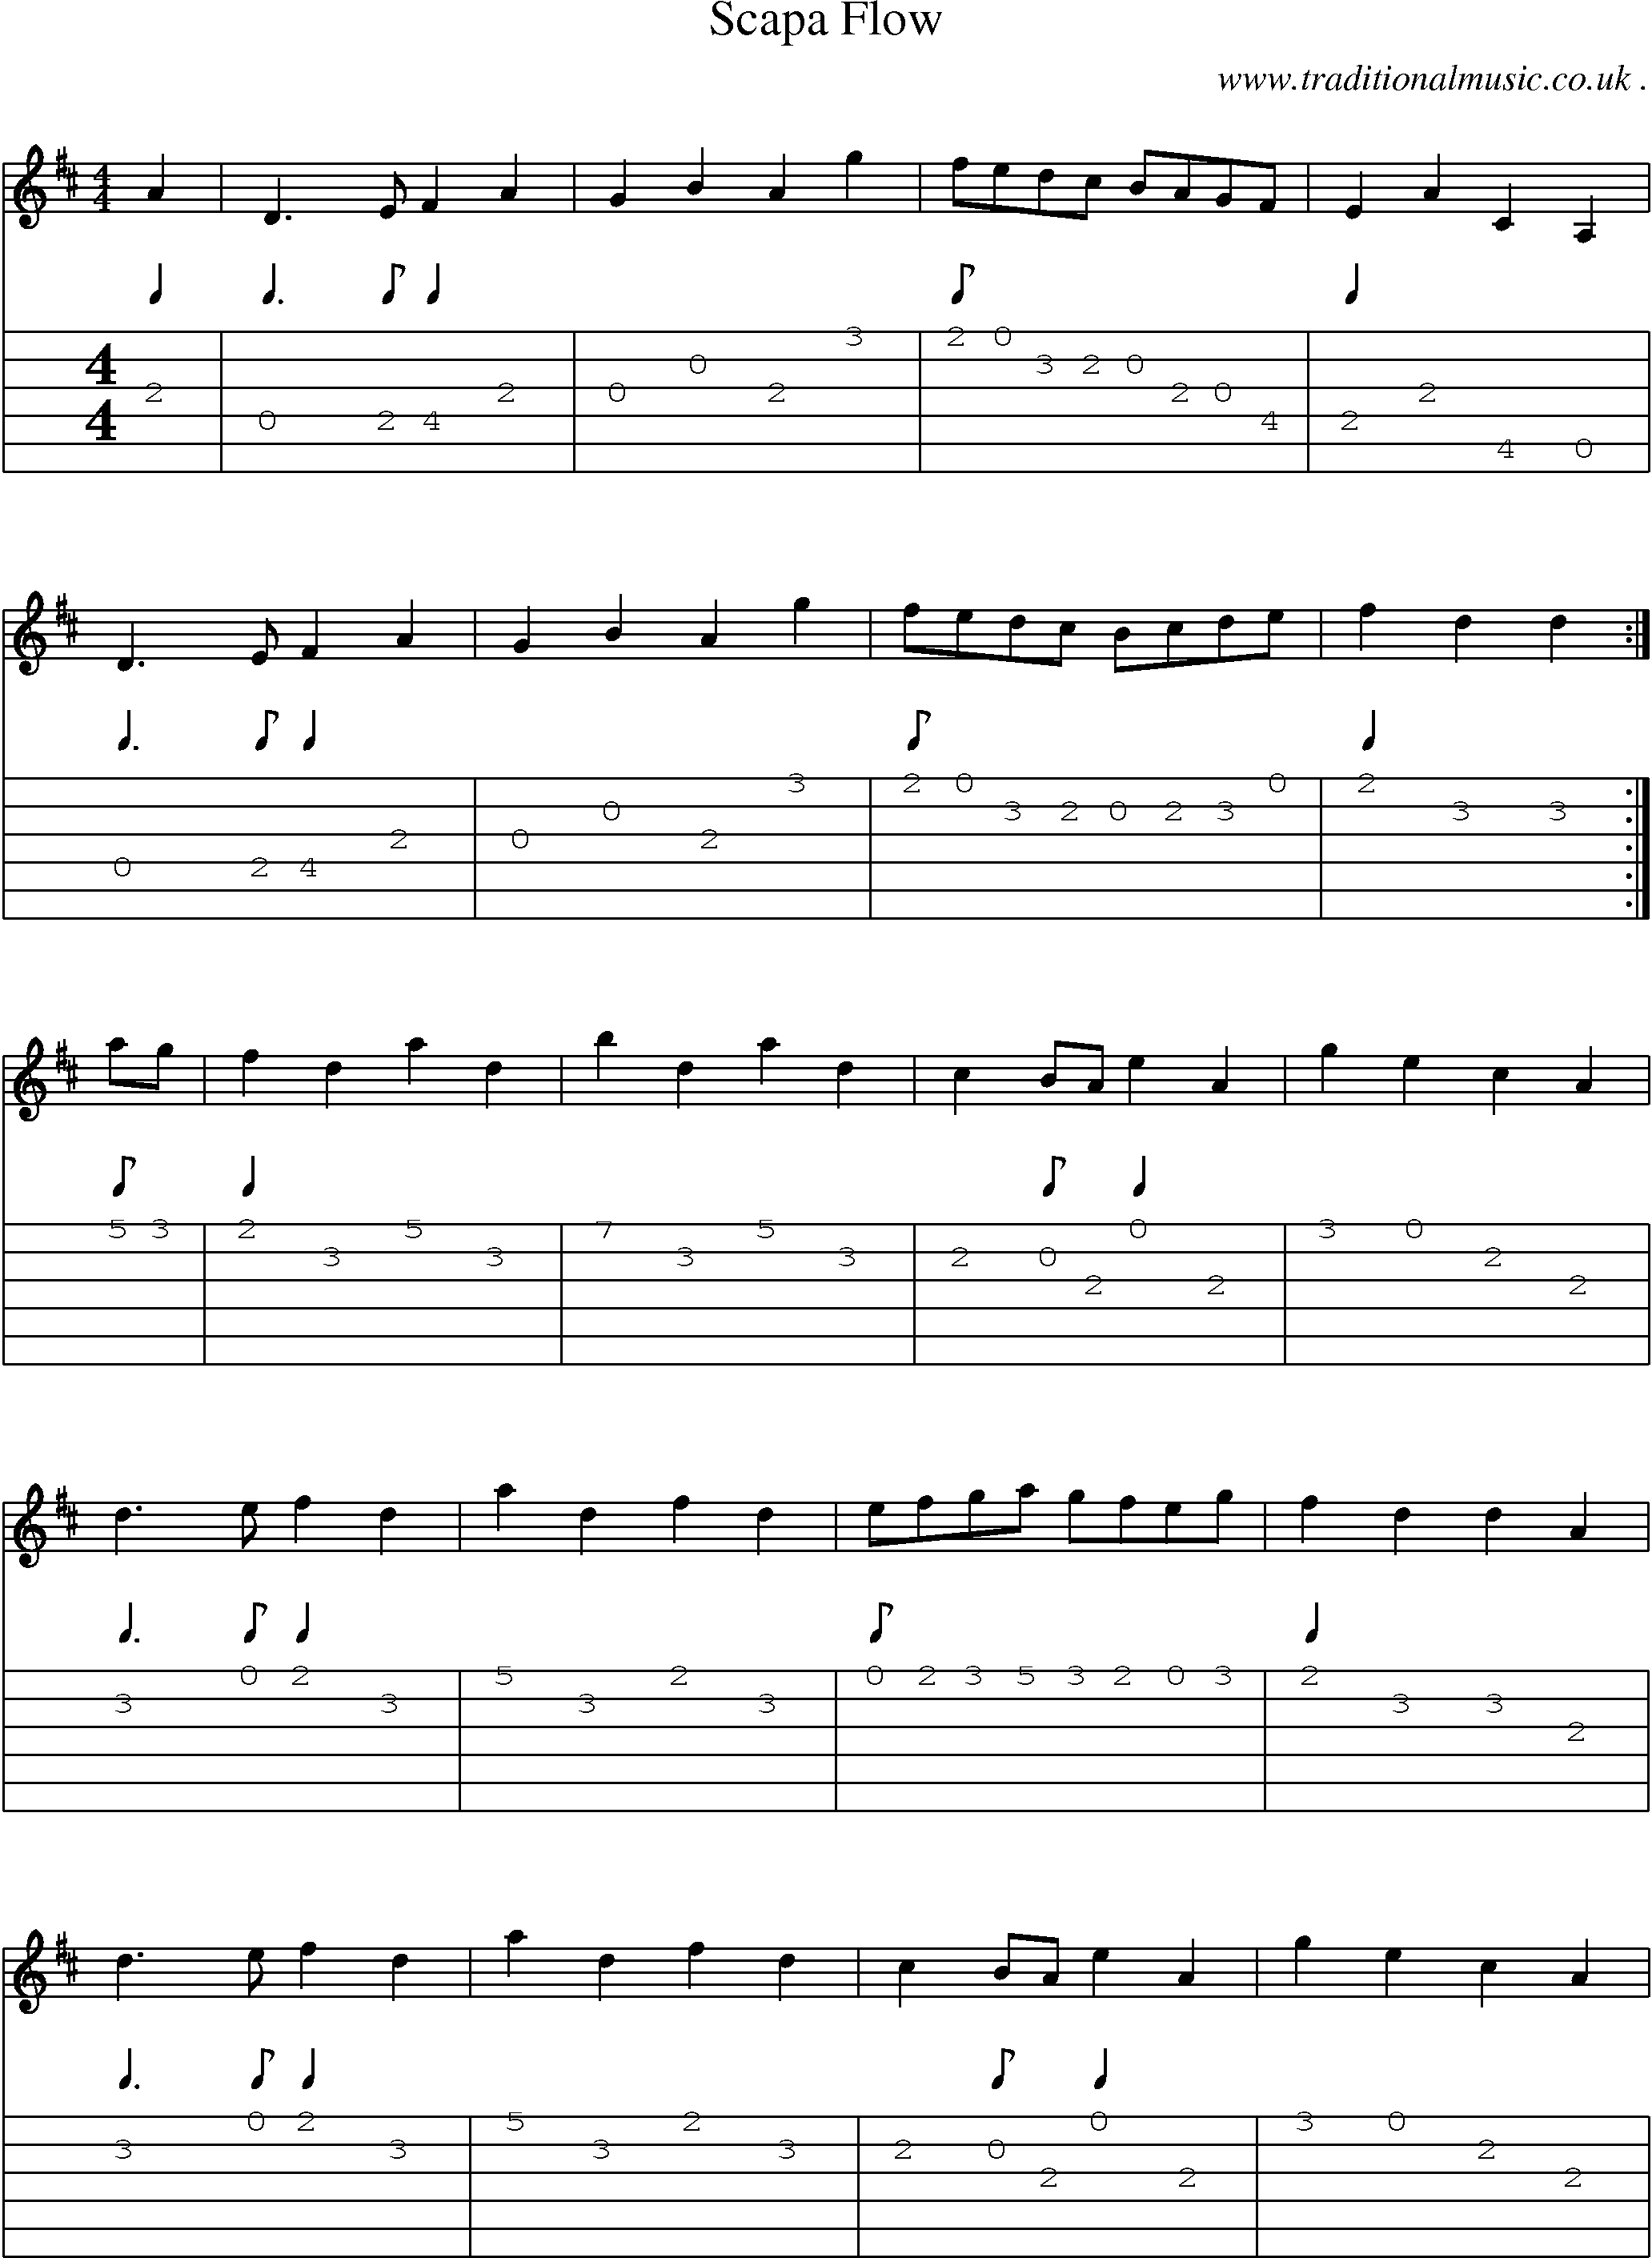 Sheet-music  score, Chords and Guitar Tabs for Scapa Flow